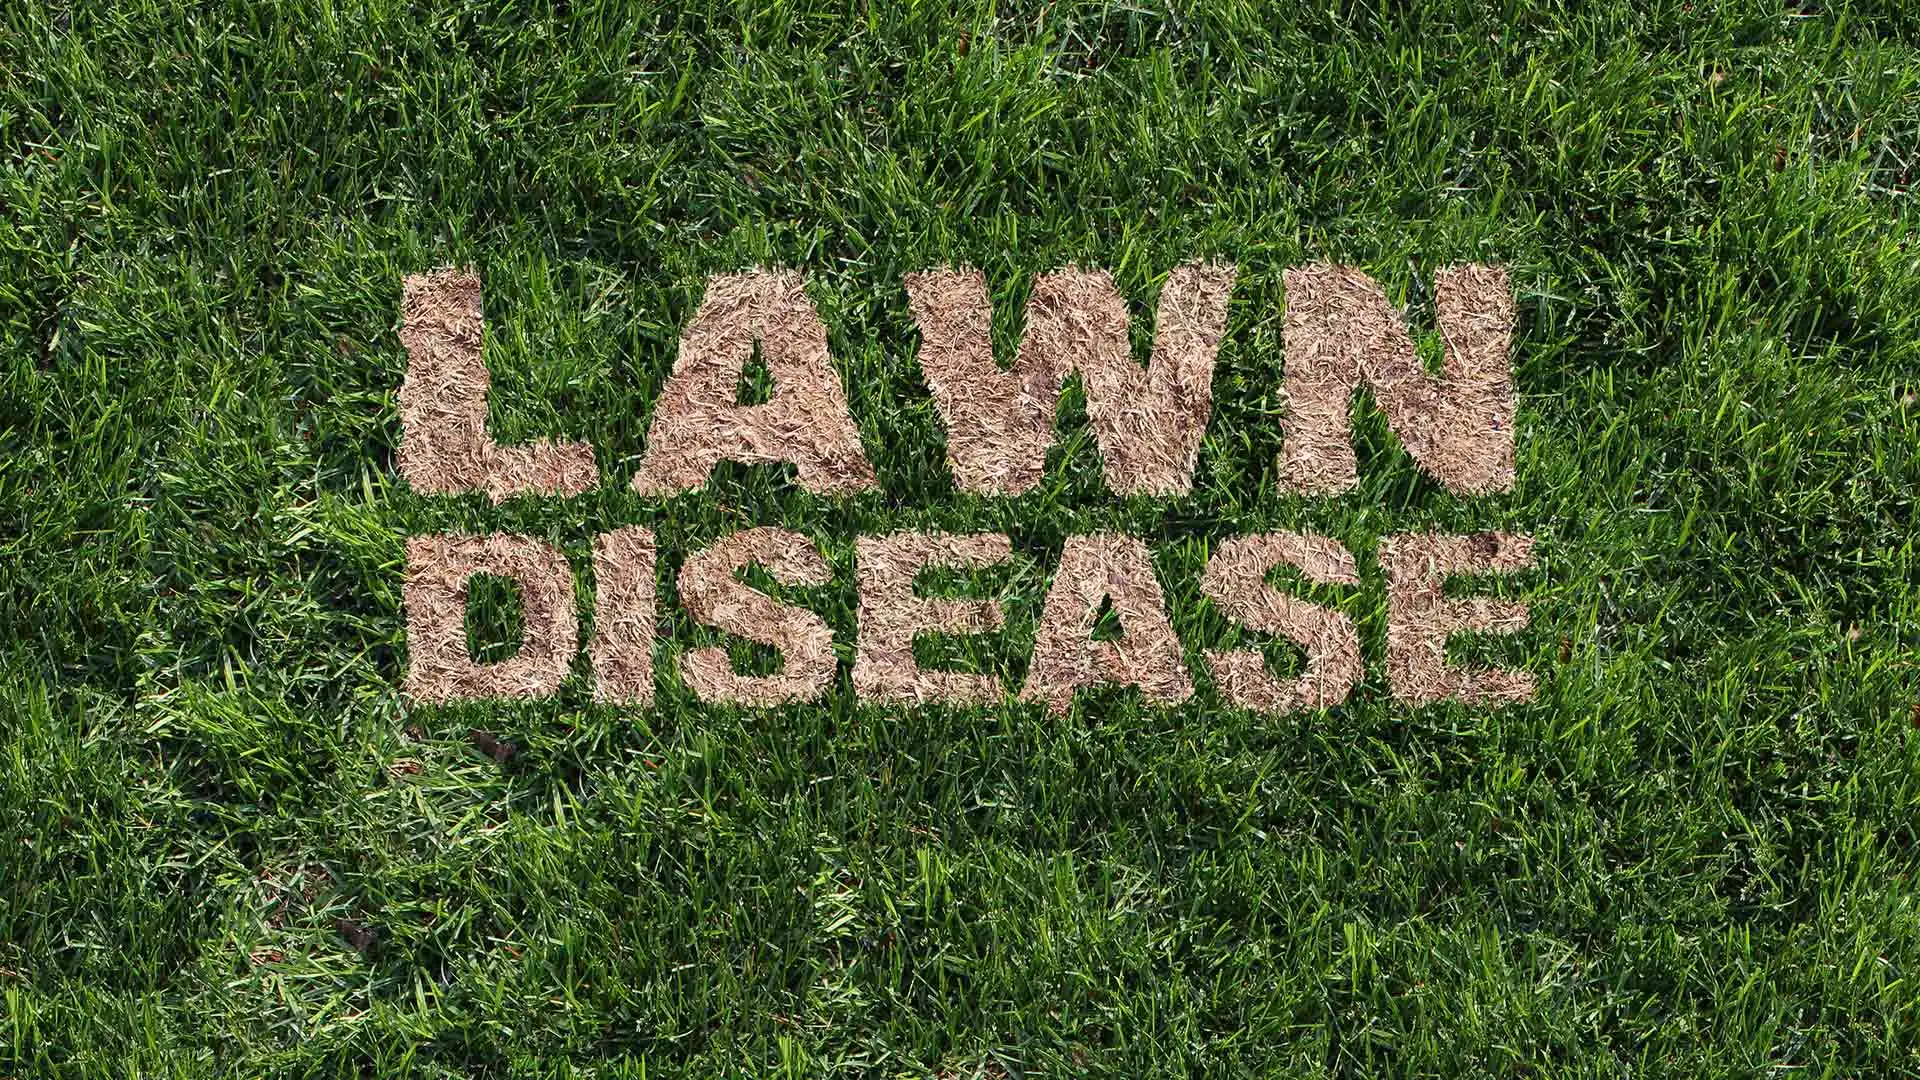 Lawn Care Services That Will Help Your Lawn Bounce Back From a Lawn Disease